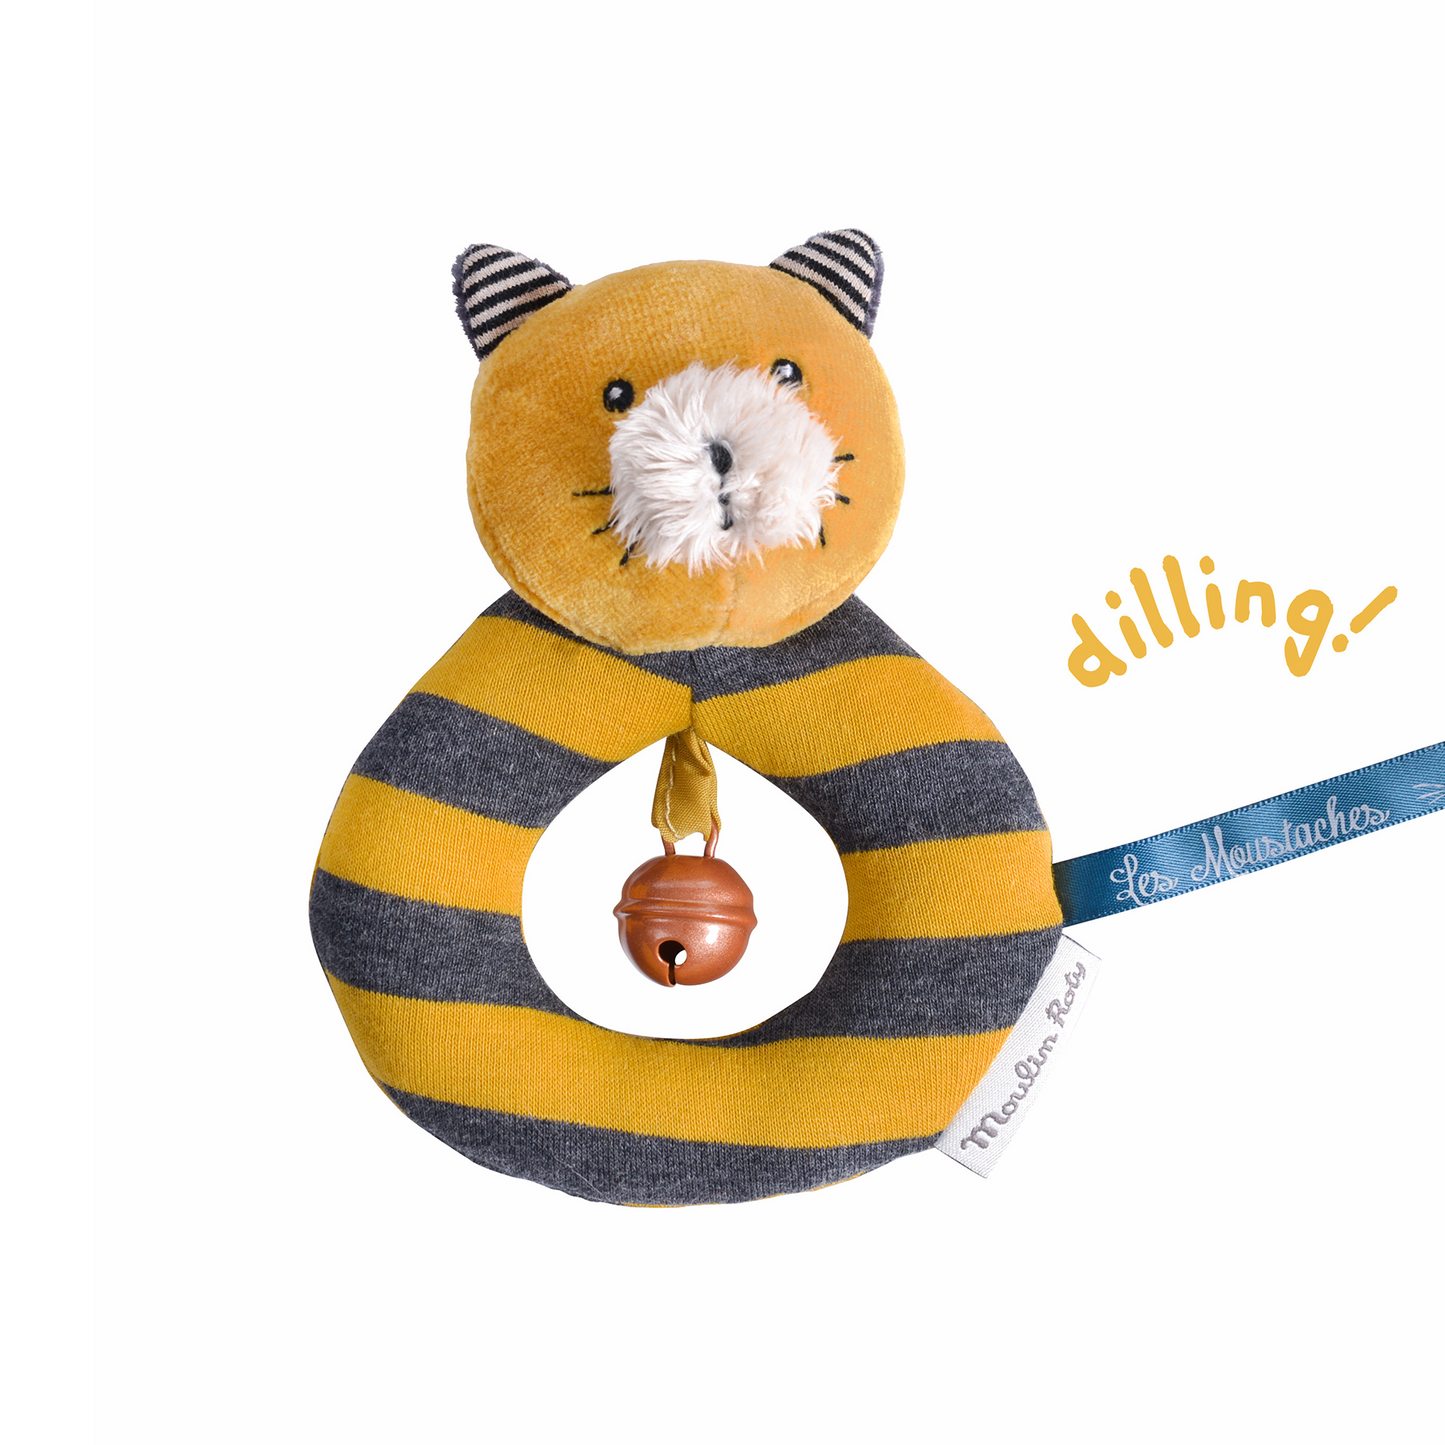 Perfect for small hands and sweet little ears, this adorable soft cat rattle is safe for chewing, grabbing, and shaking - with a soft bell.